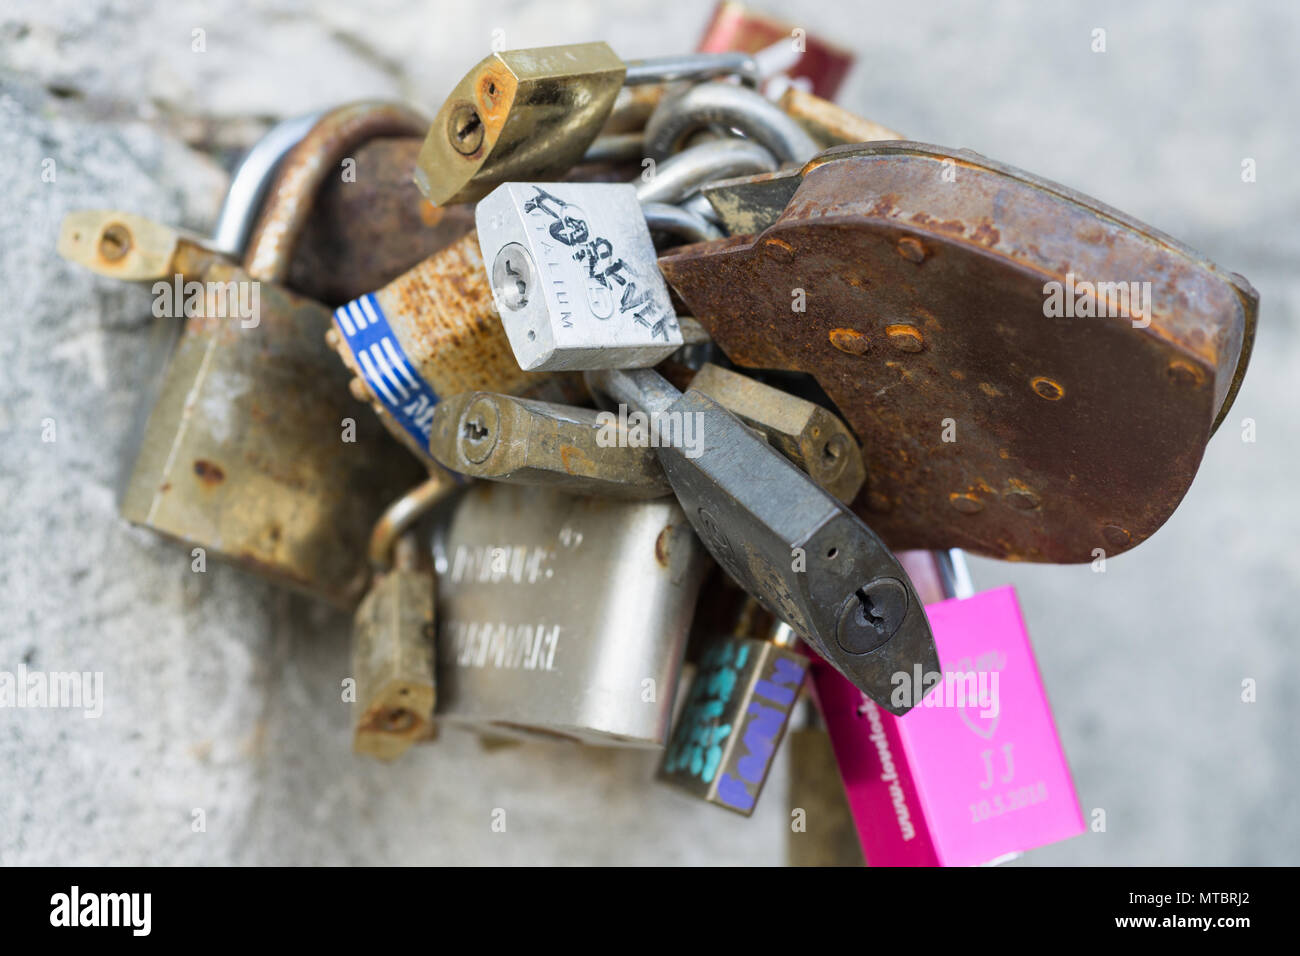 Love padlocks with Forever inscribed, locked on a structure in Paris, France. Stock Photo